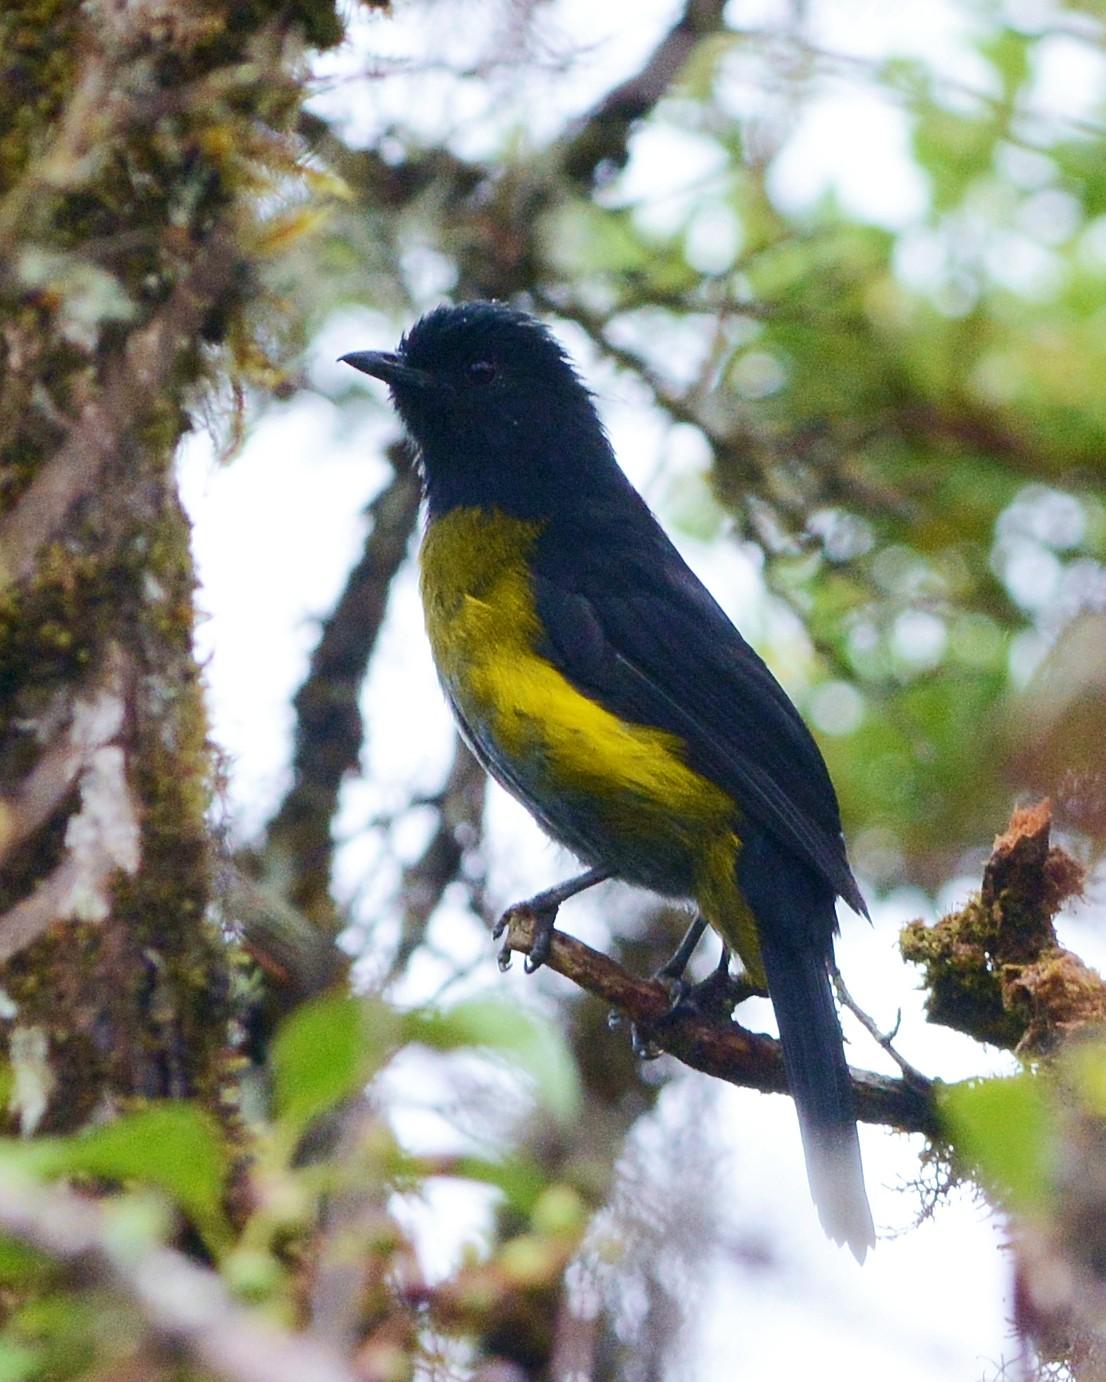 Black-and-yellow Silky-flycatcher Photo by David Hollie